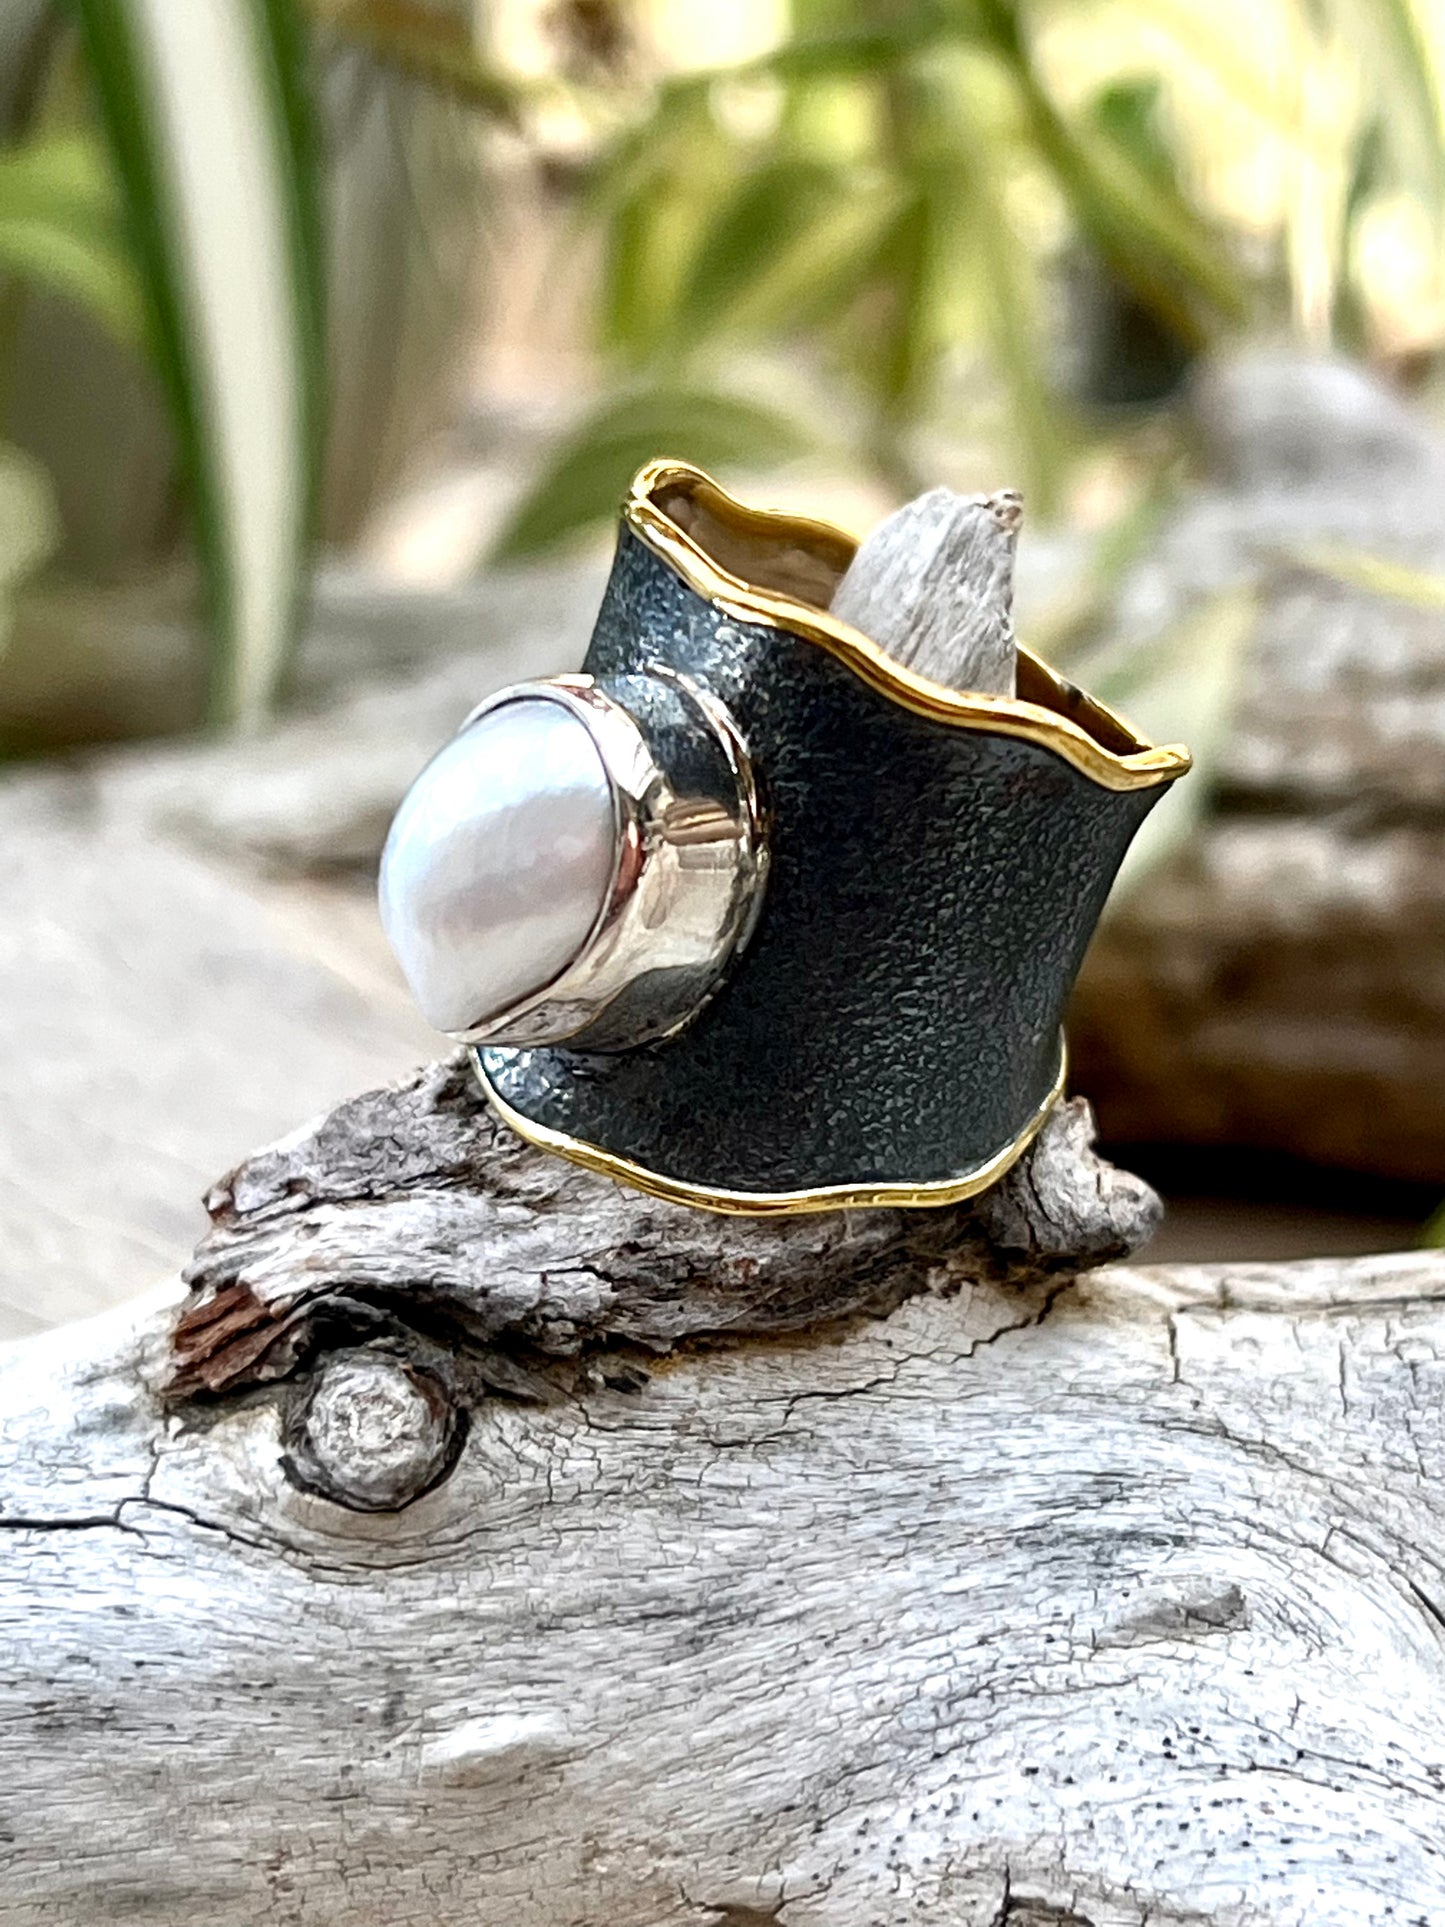 An elegant Oxidized Cigar Band with Gold Trim and Pearl ring adorned with a black leather band from Super Silver.